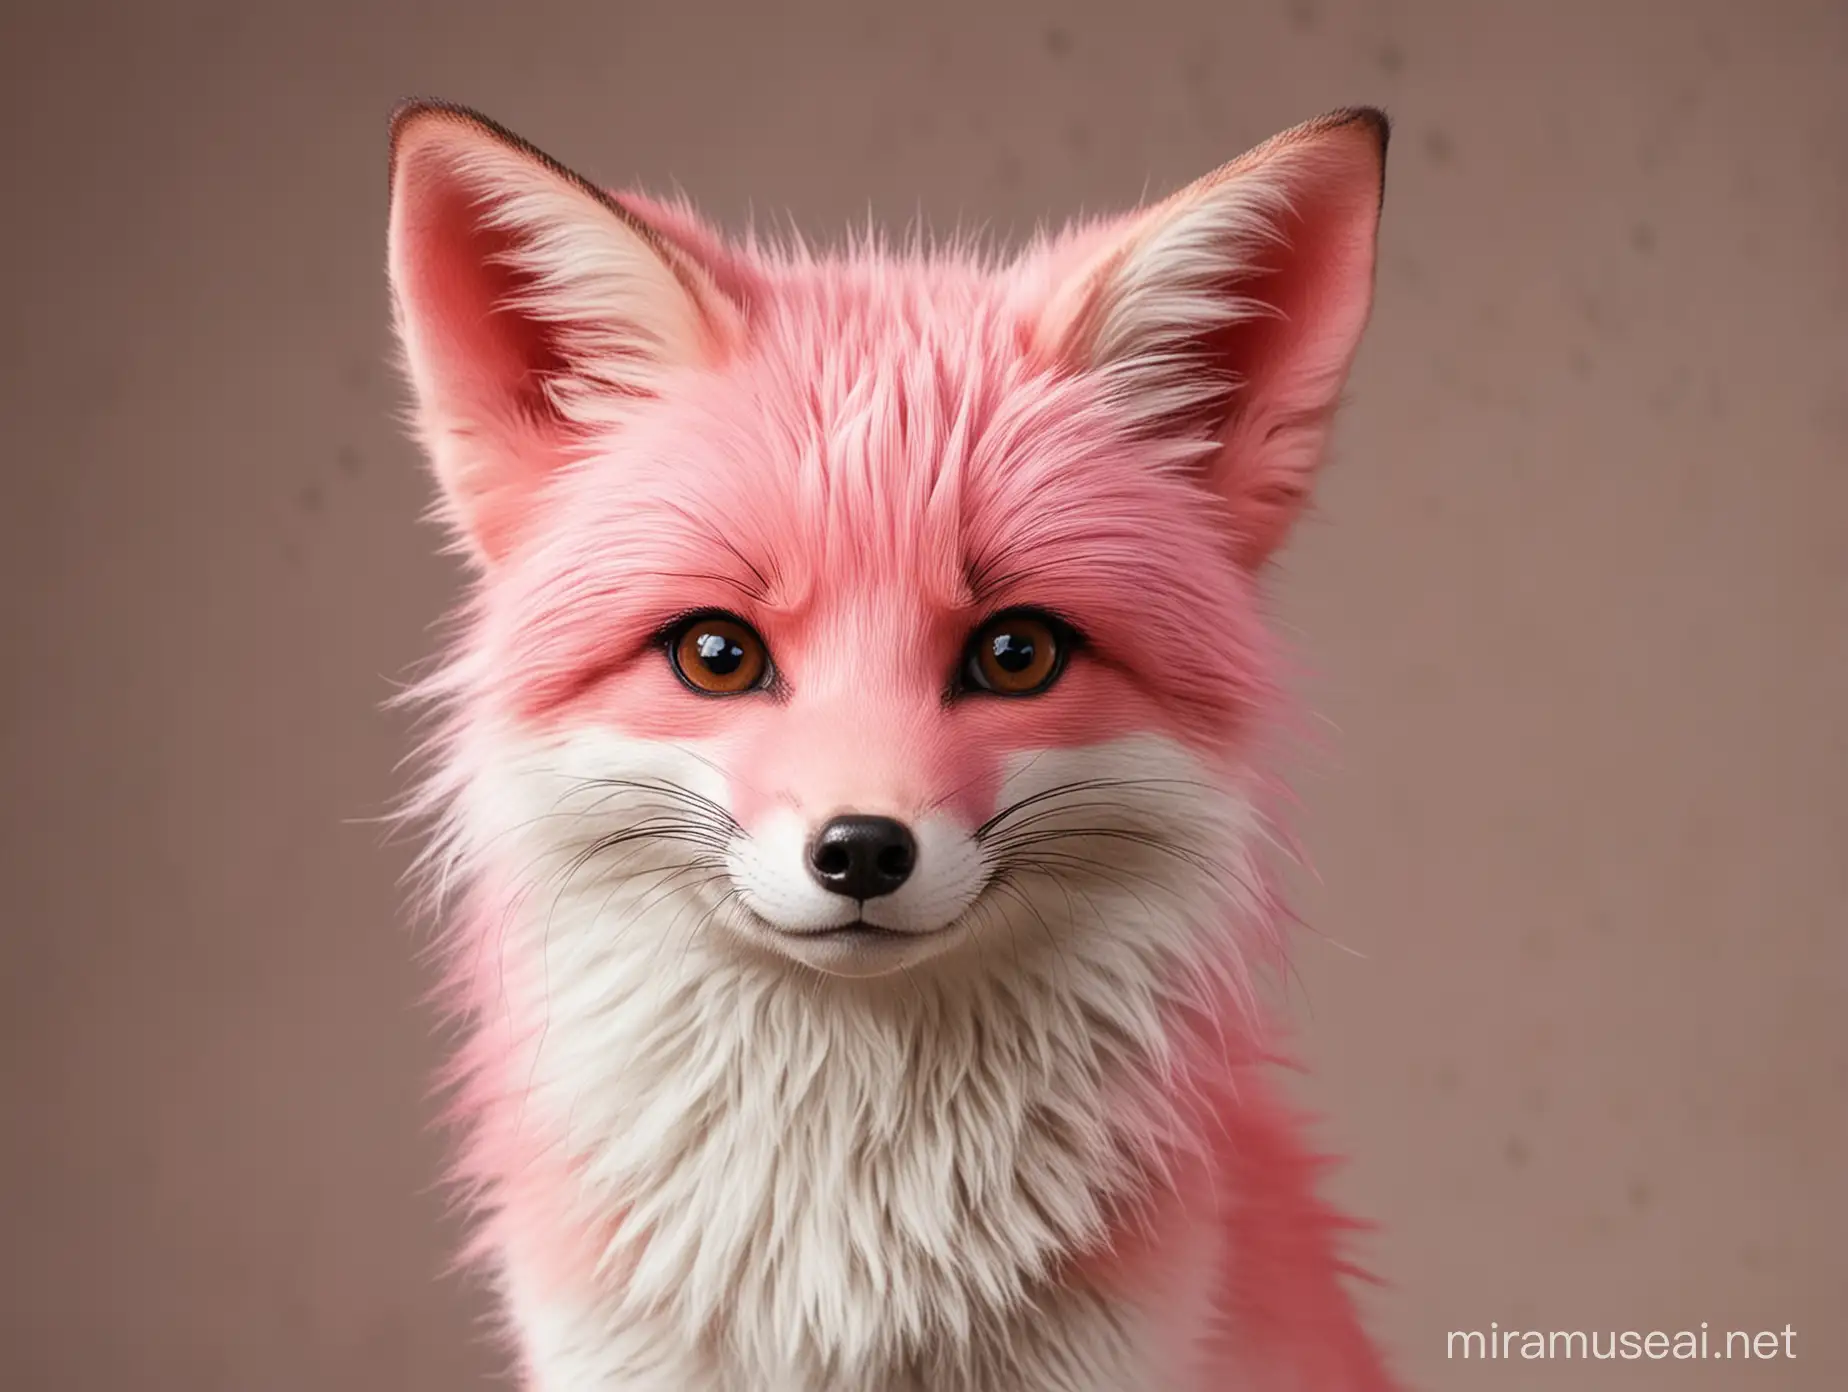 Proud and Flirty Female Fox with Pink Highlights in Hair